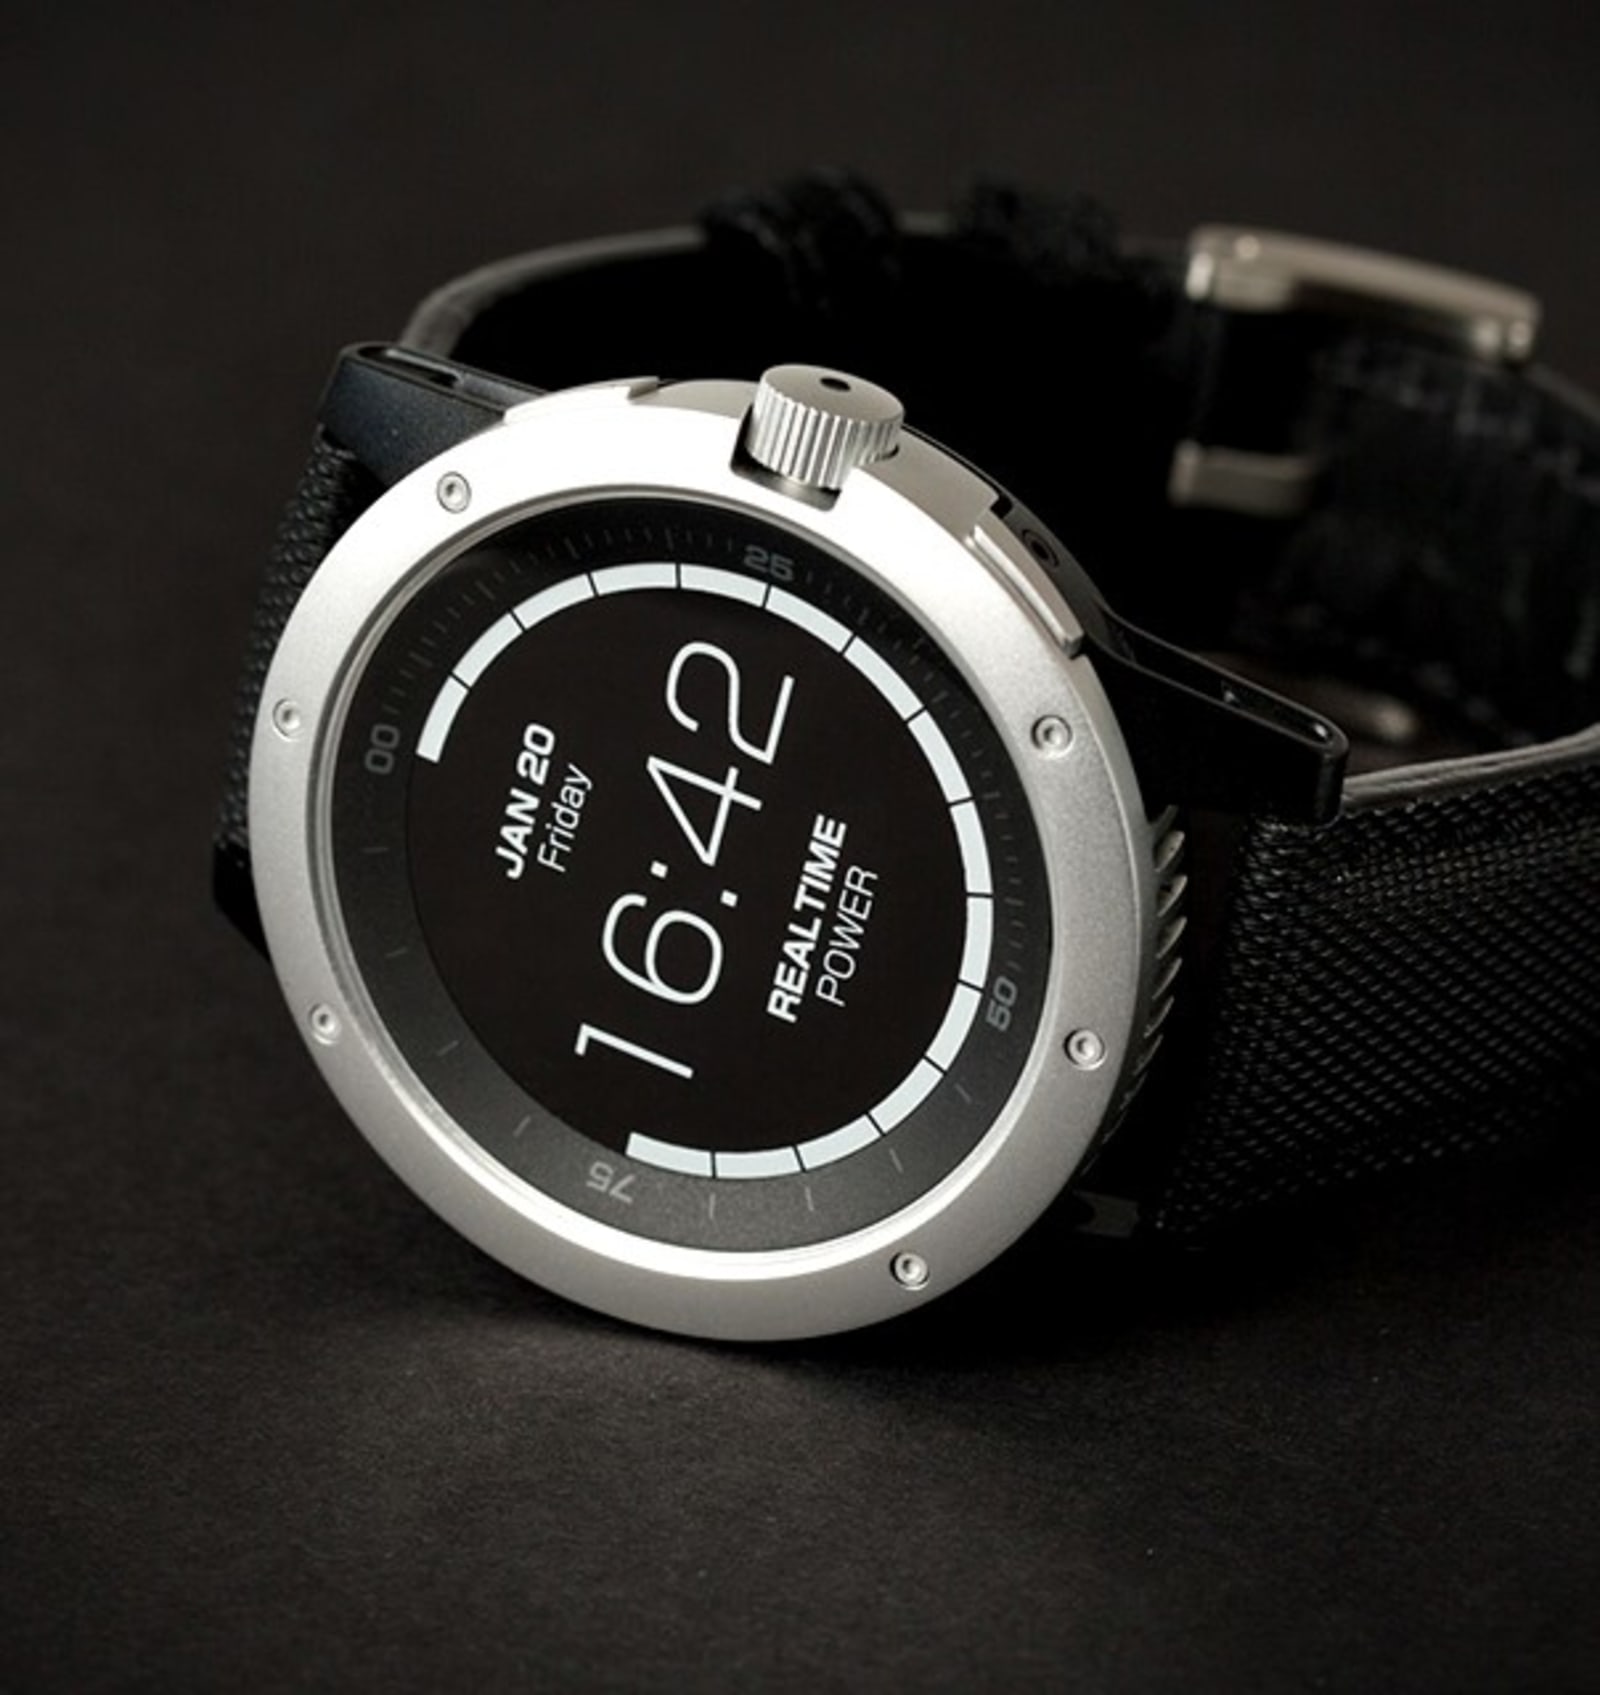 The PowerWatch is a body heat-powered smartwatch that does very little |  Engadget